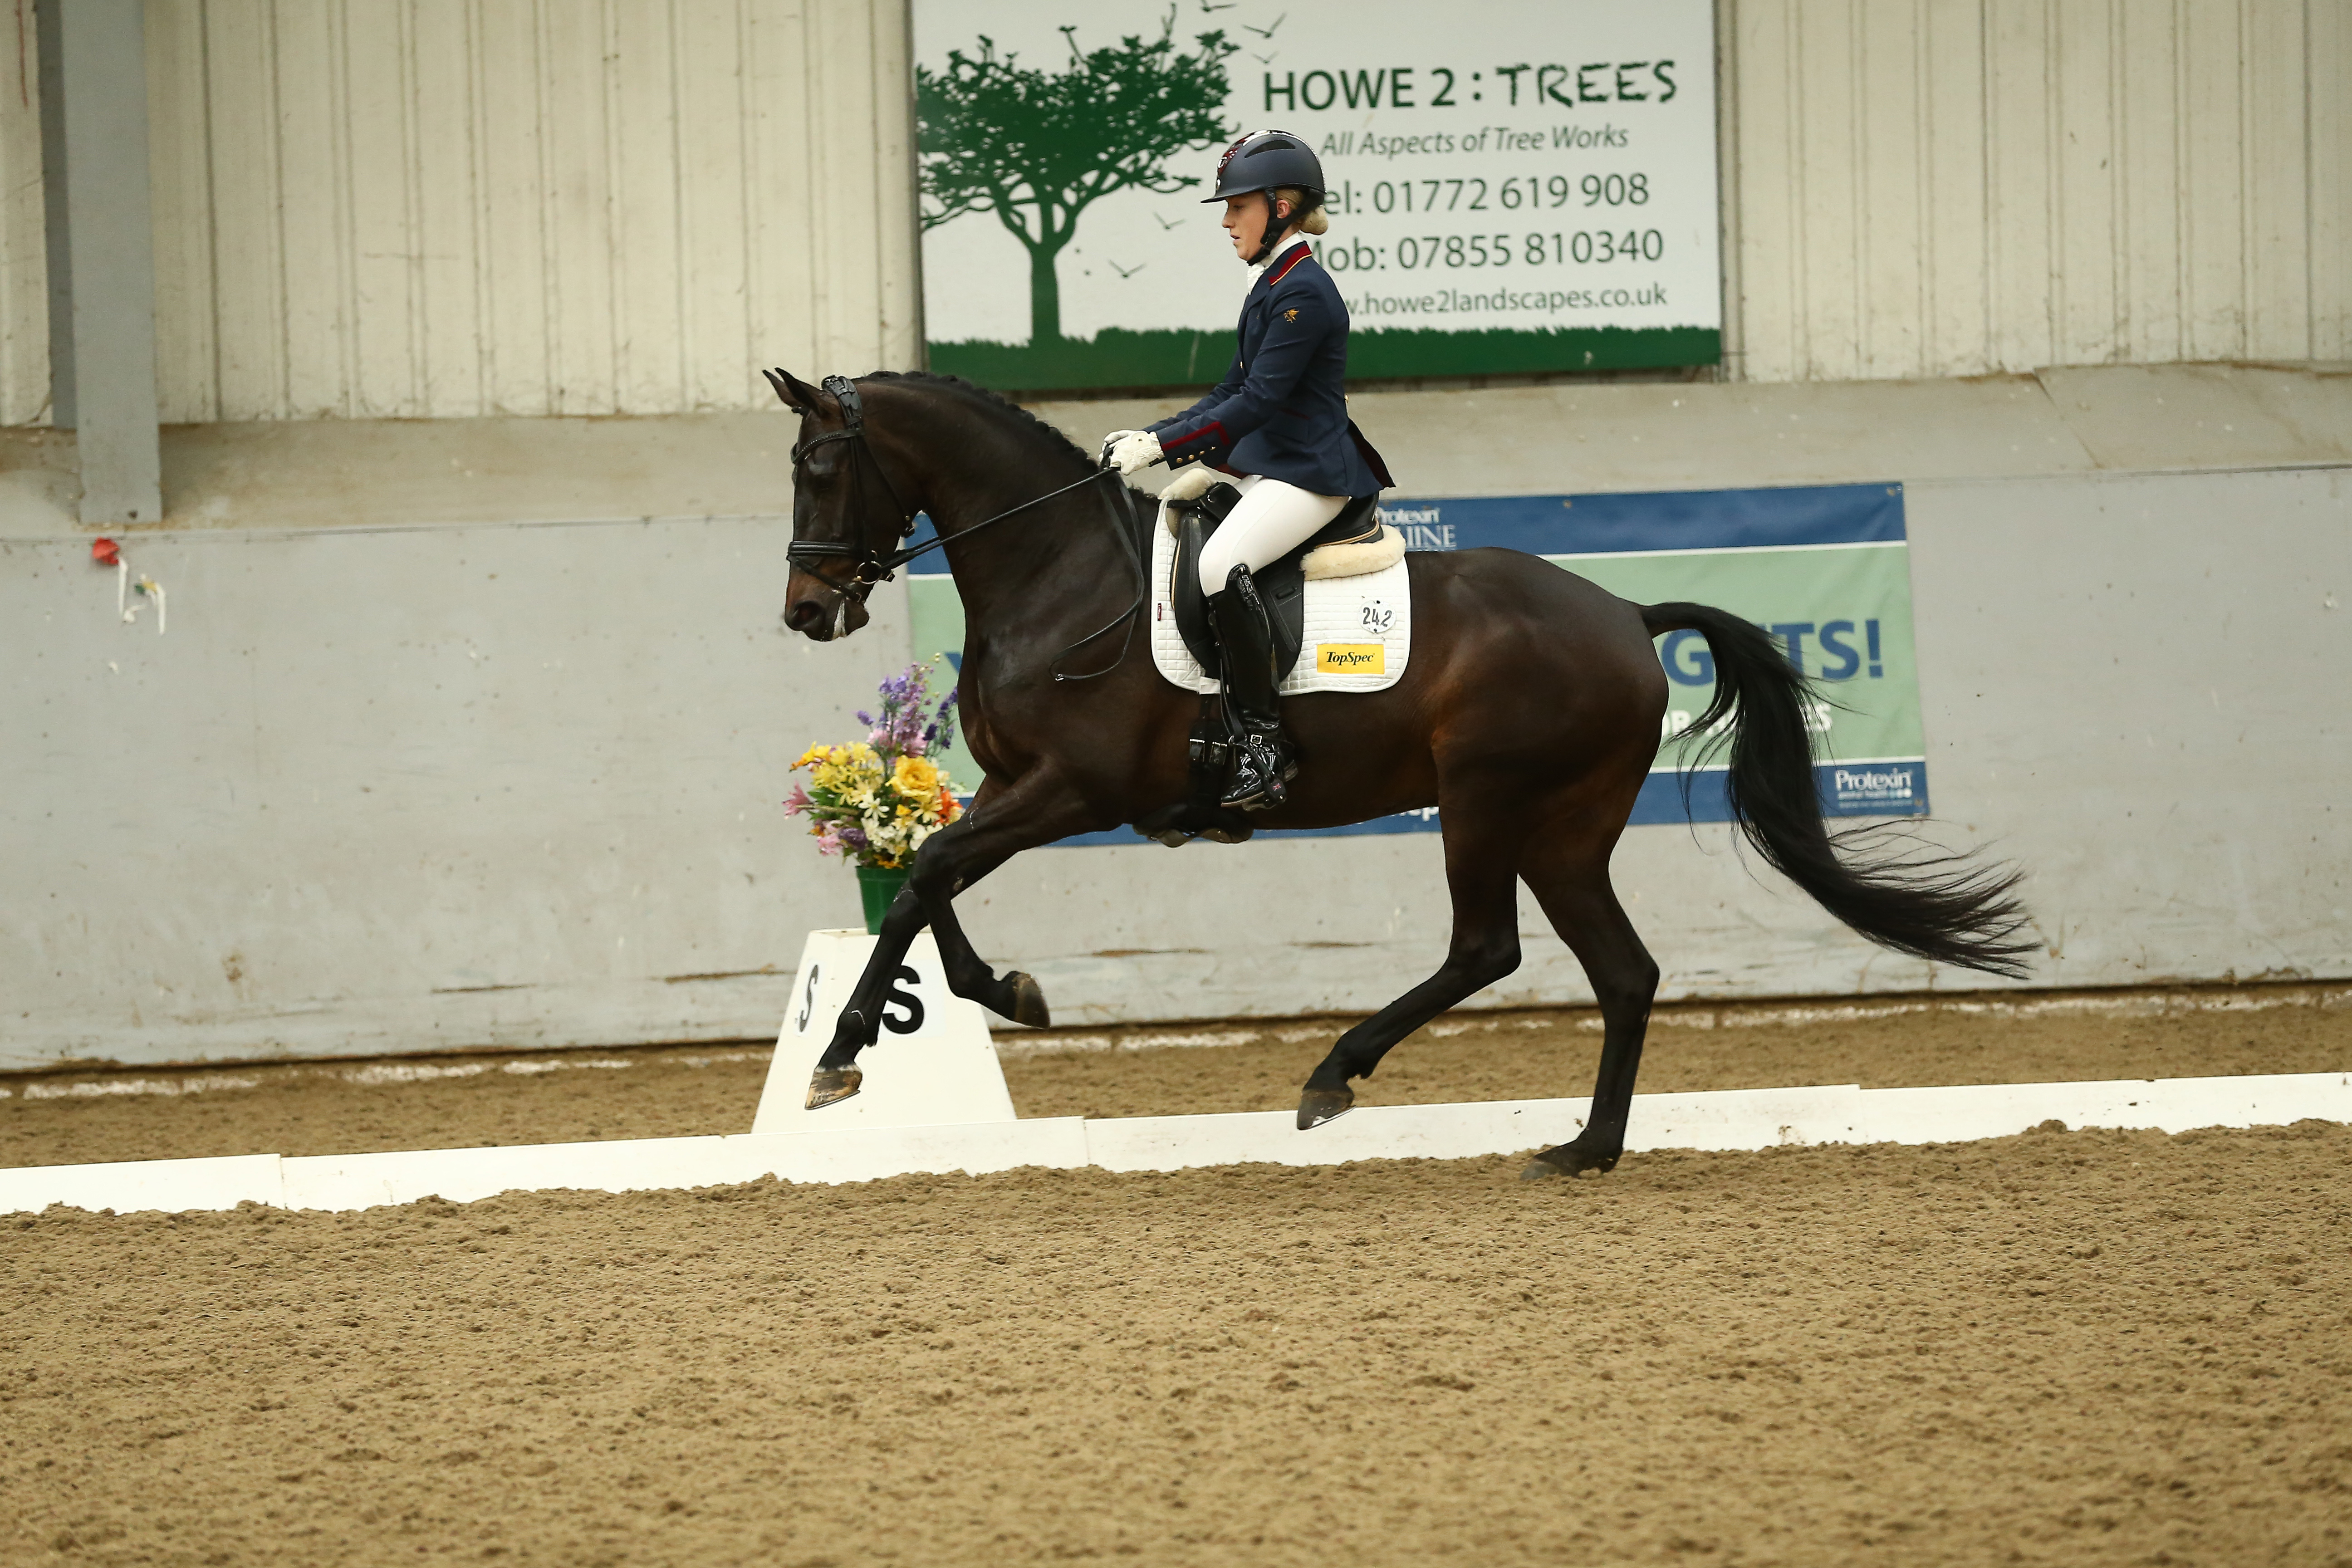 Success for Team TopSpec Riders - MSJ Top Secret, Elementary Northwest Regional Champion, owned by Emma Blundell & Mount St. John and ridden by Lucinda Elliot